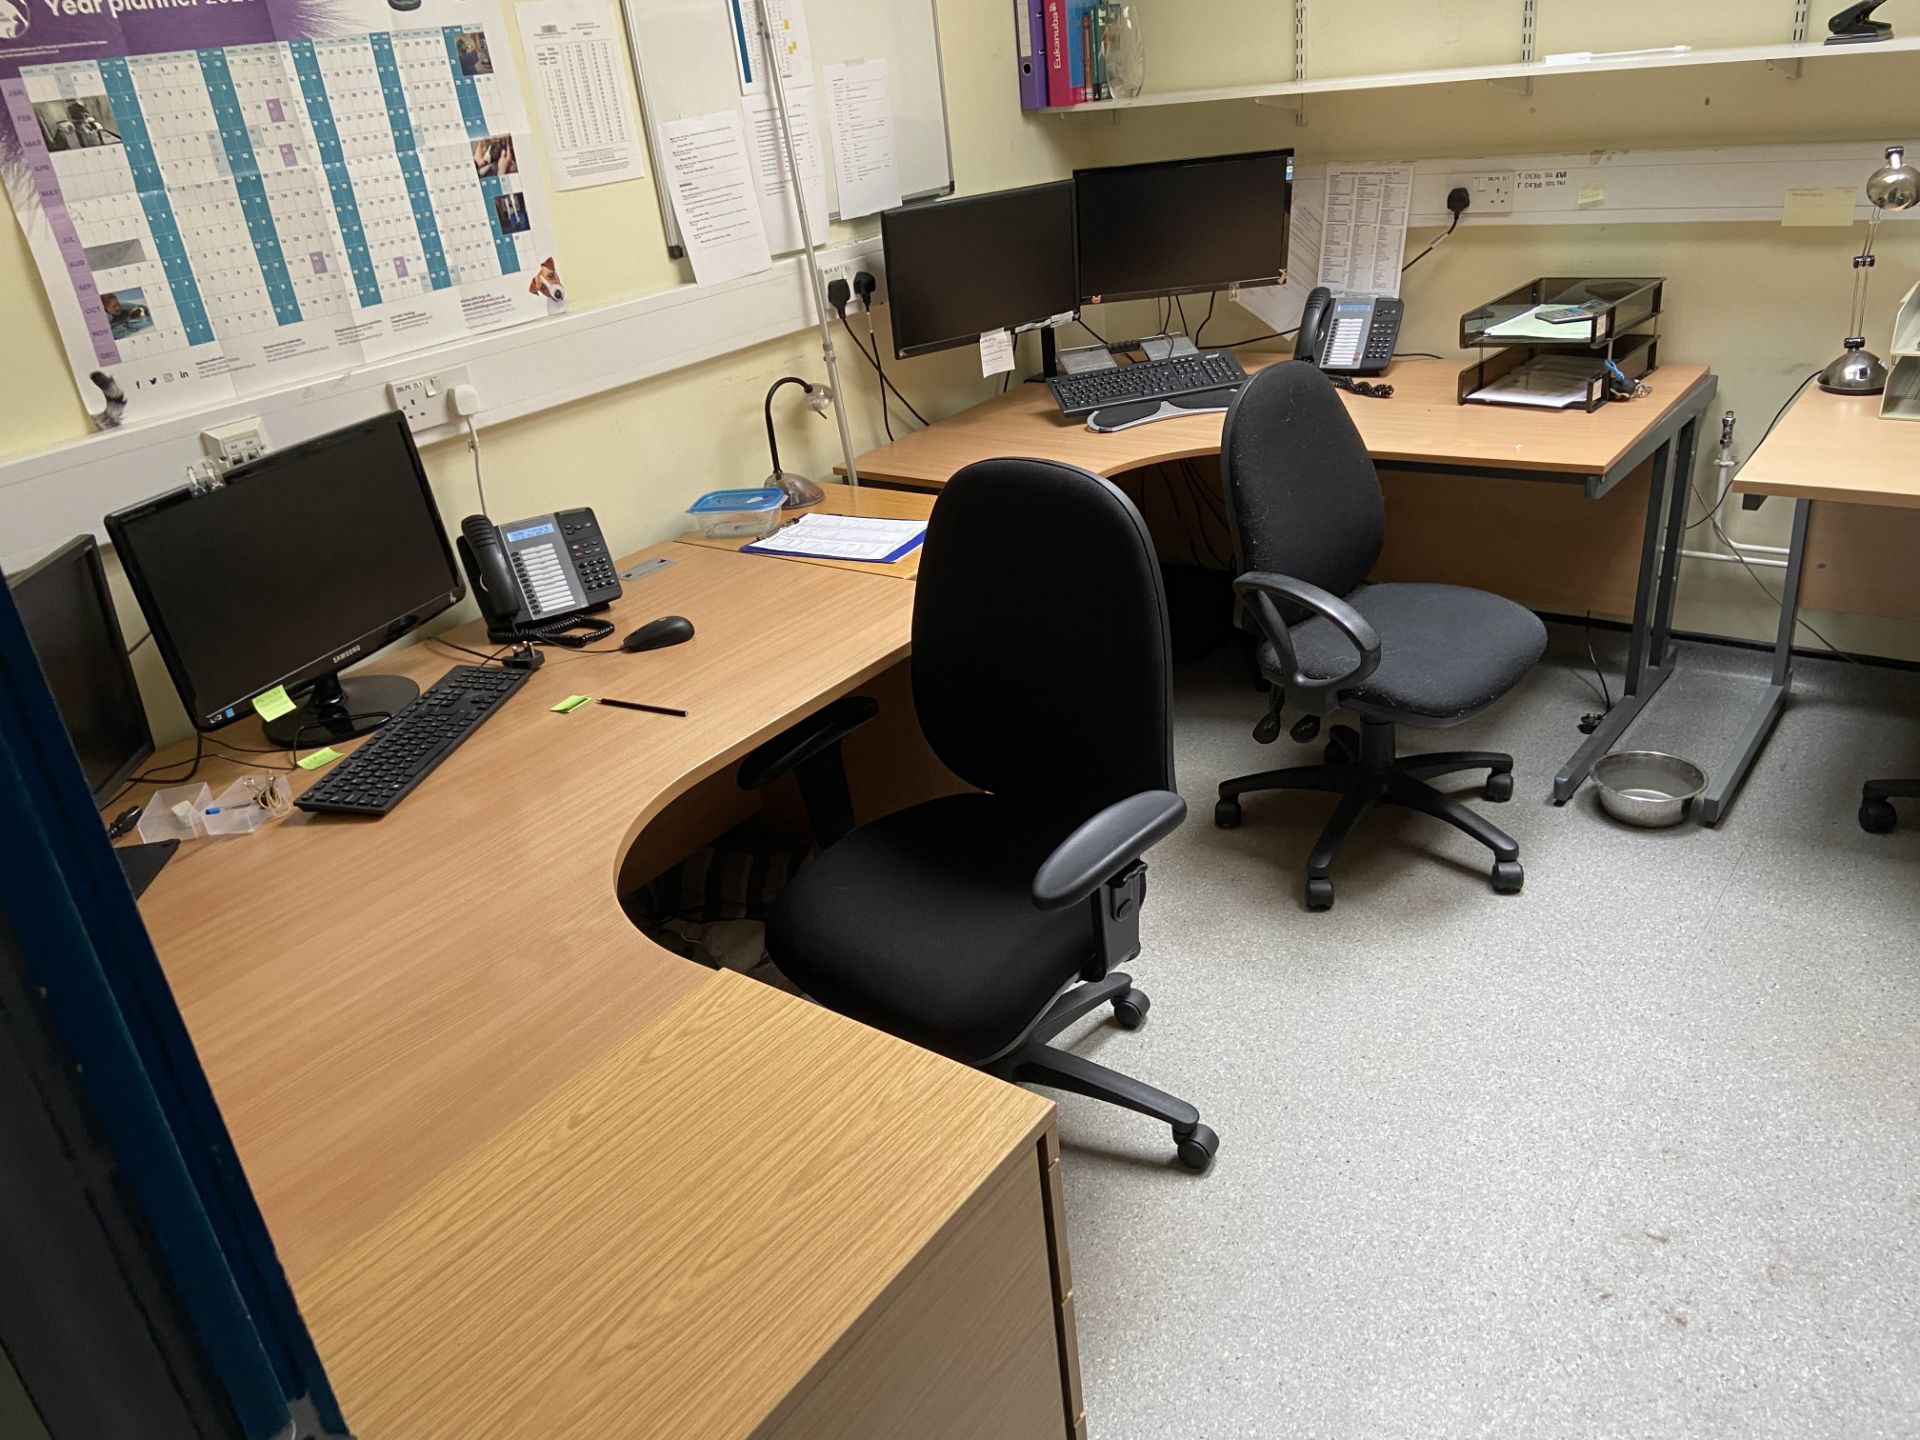 Range of office furniture throughout the small animal clinic. Ergo Desks x 30, Desks x banks of 6 - Image 5 of 15